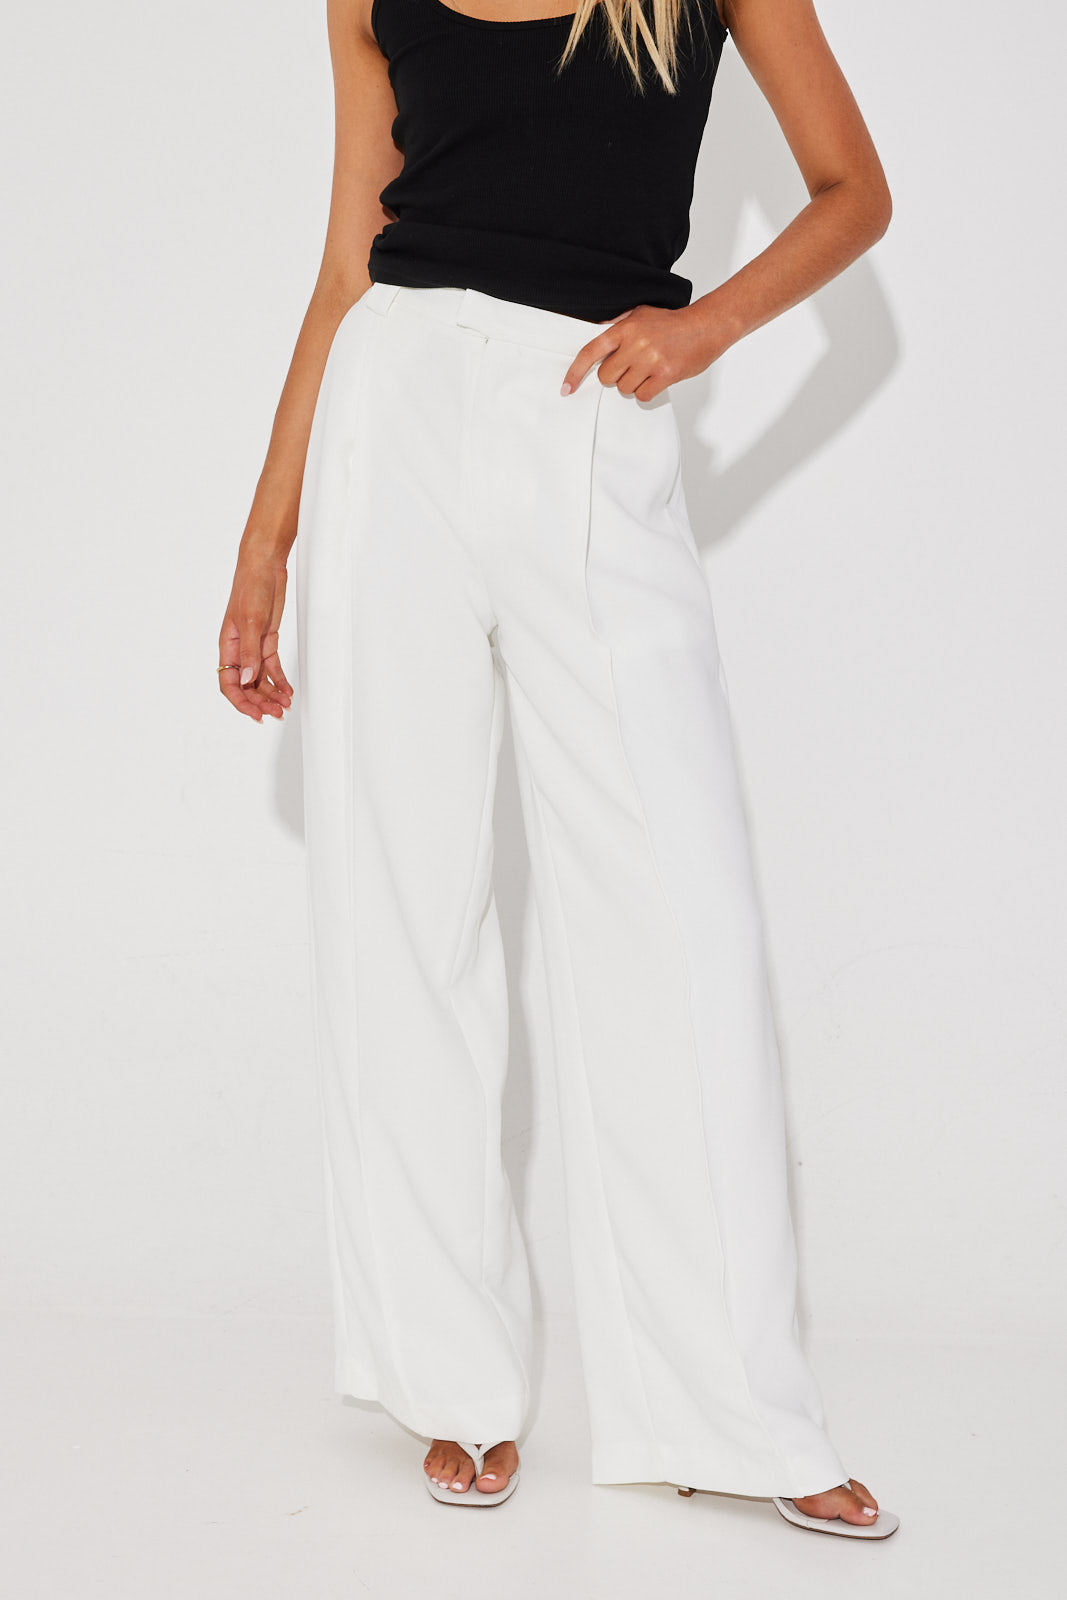 Rossi Pant White - SALE